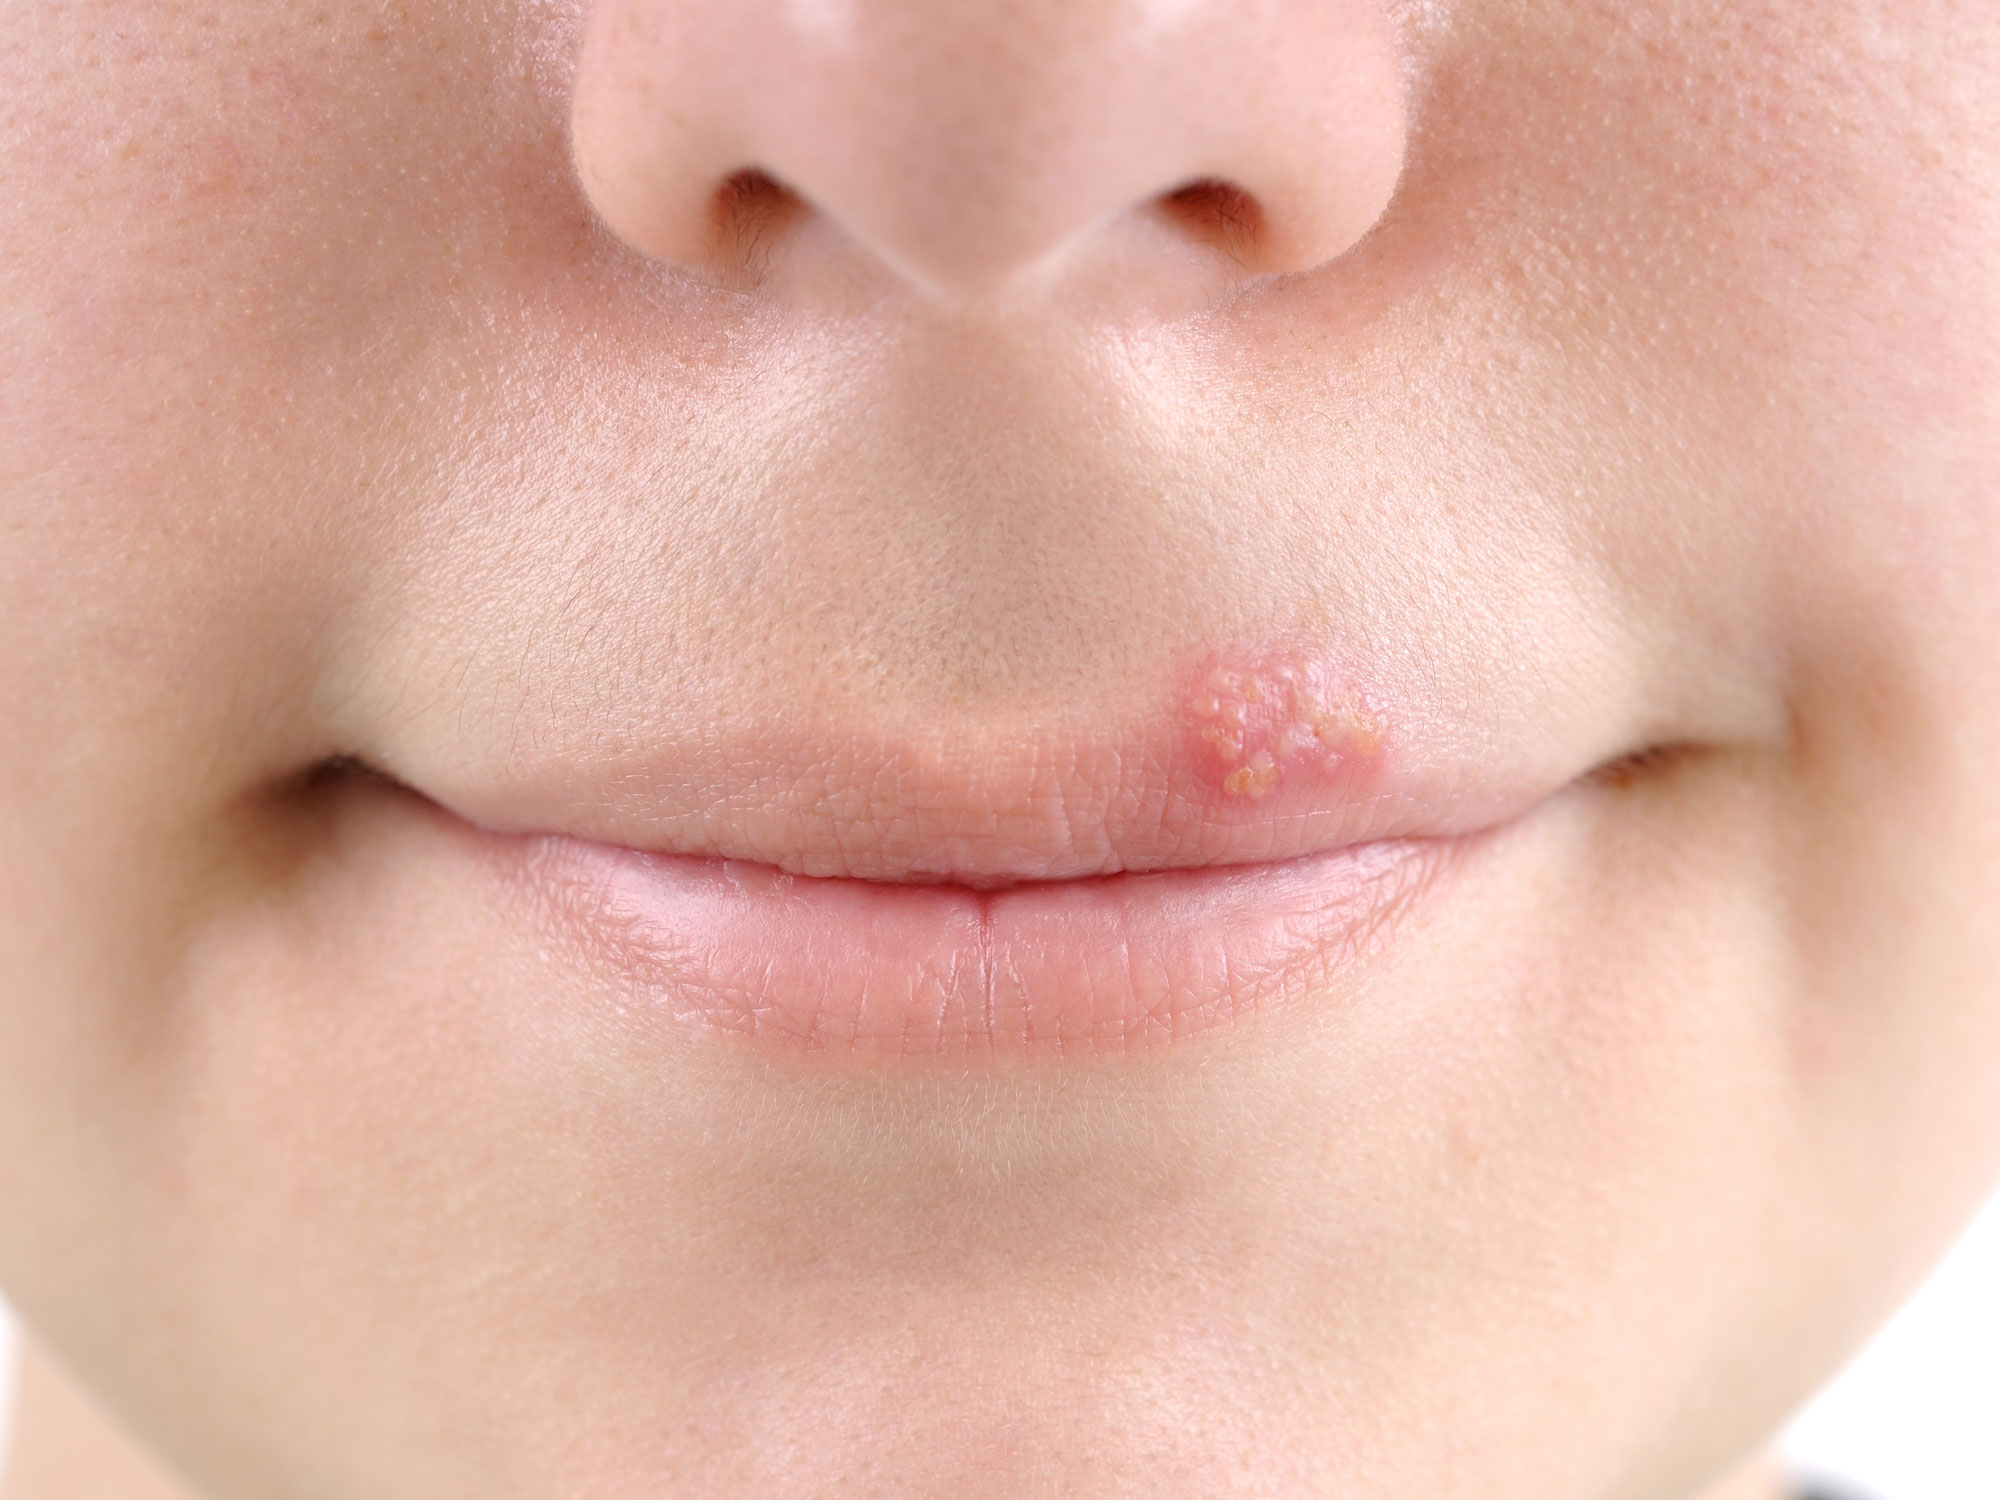 6 natural cures for the common cold sore